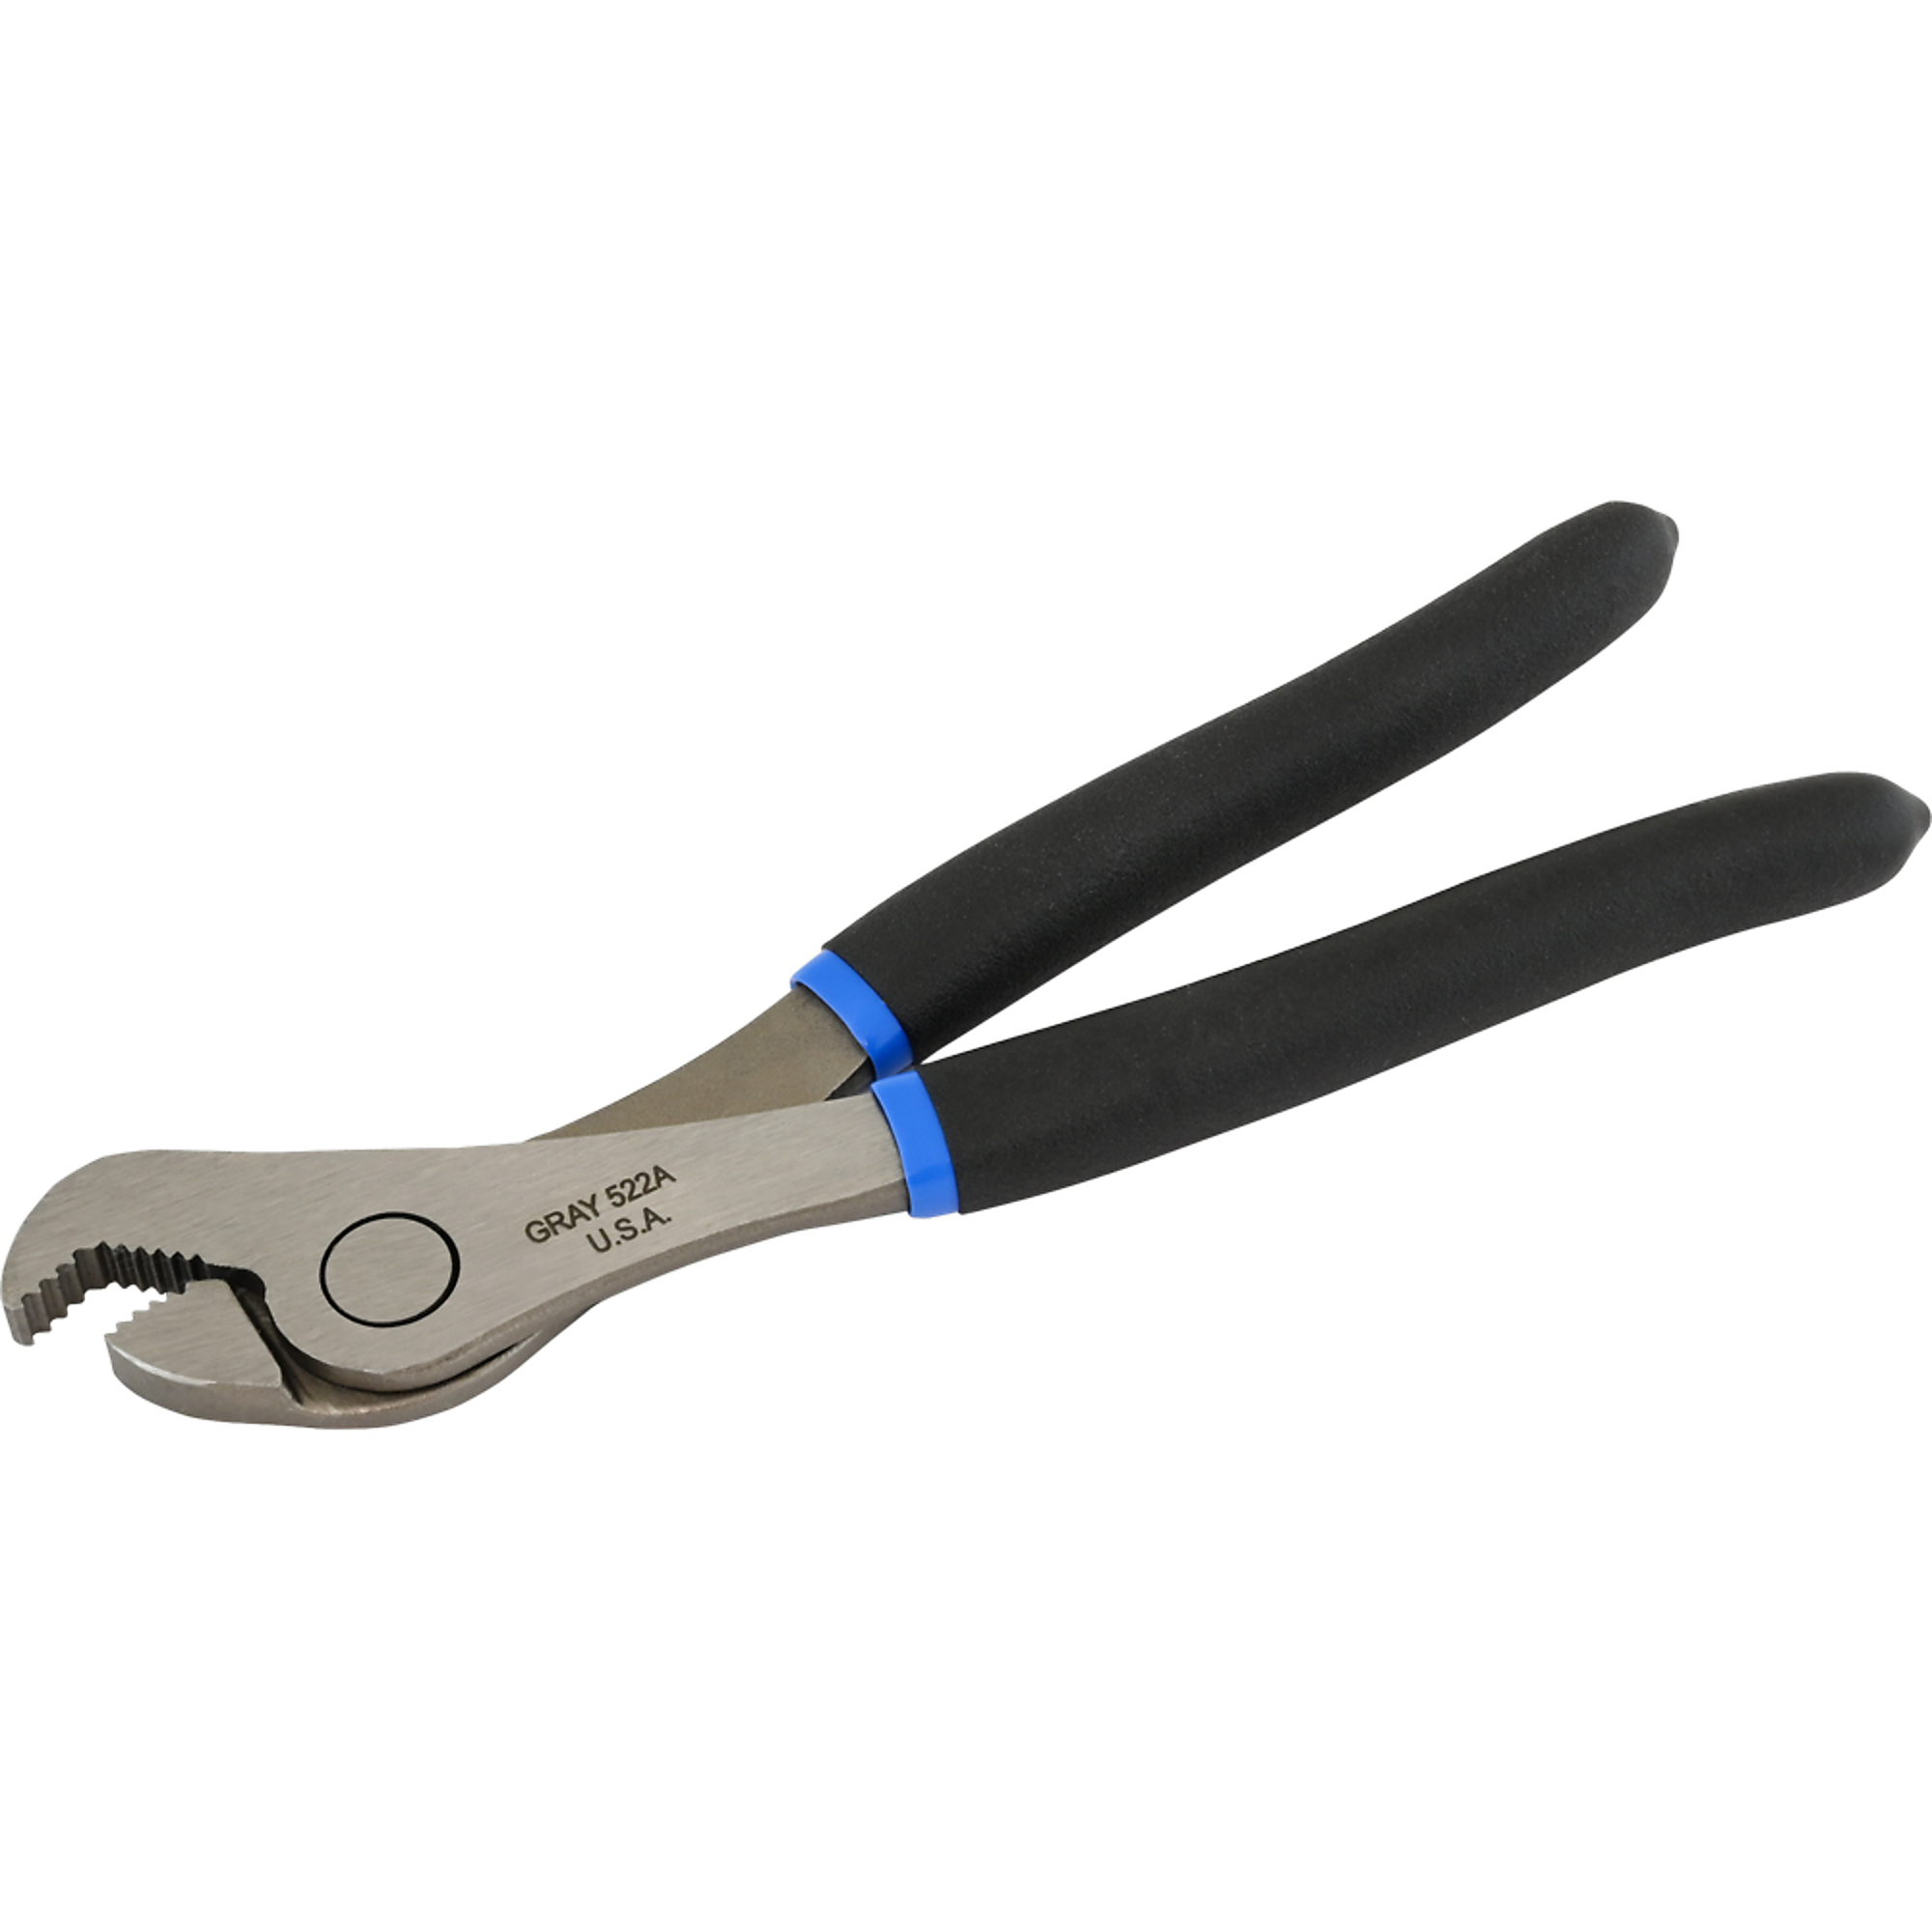 Gray Tools, Angle Nose Battery Plier, 7-1/2Inch Long, Vinyl Grips, Pieces (qty.) 1 Material Alloy Steel, Model 522A